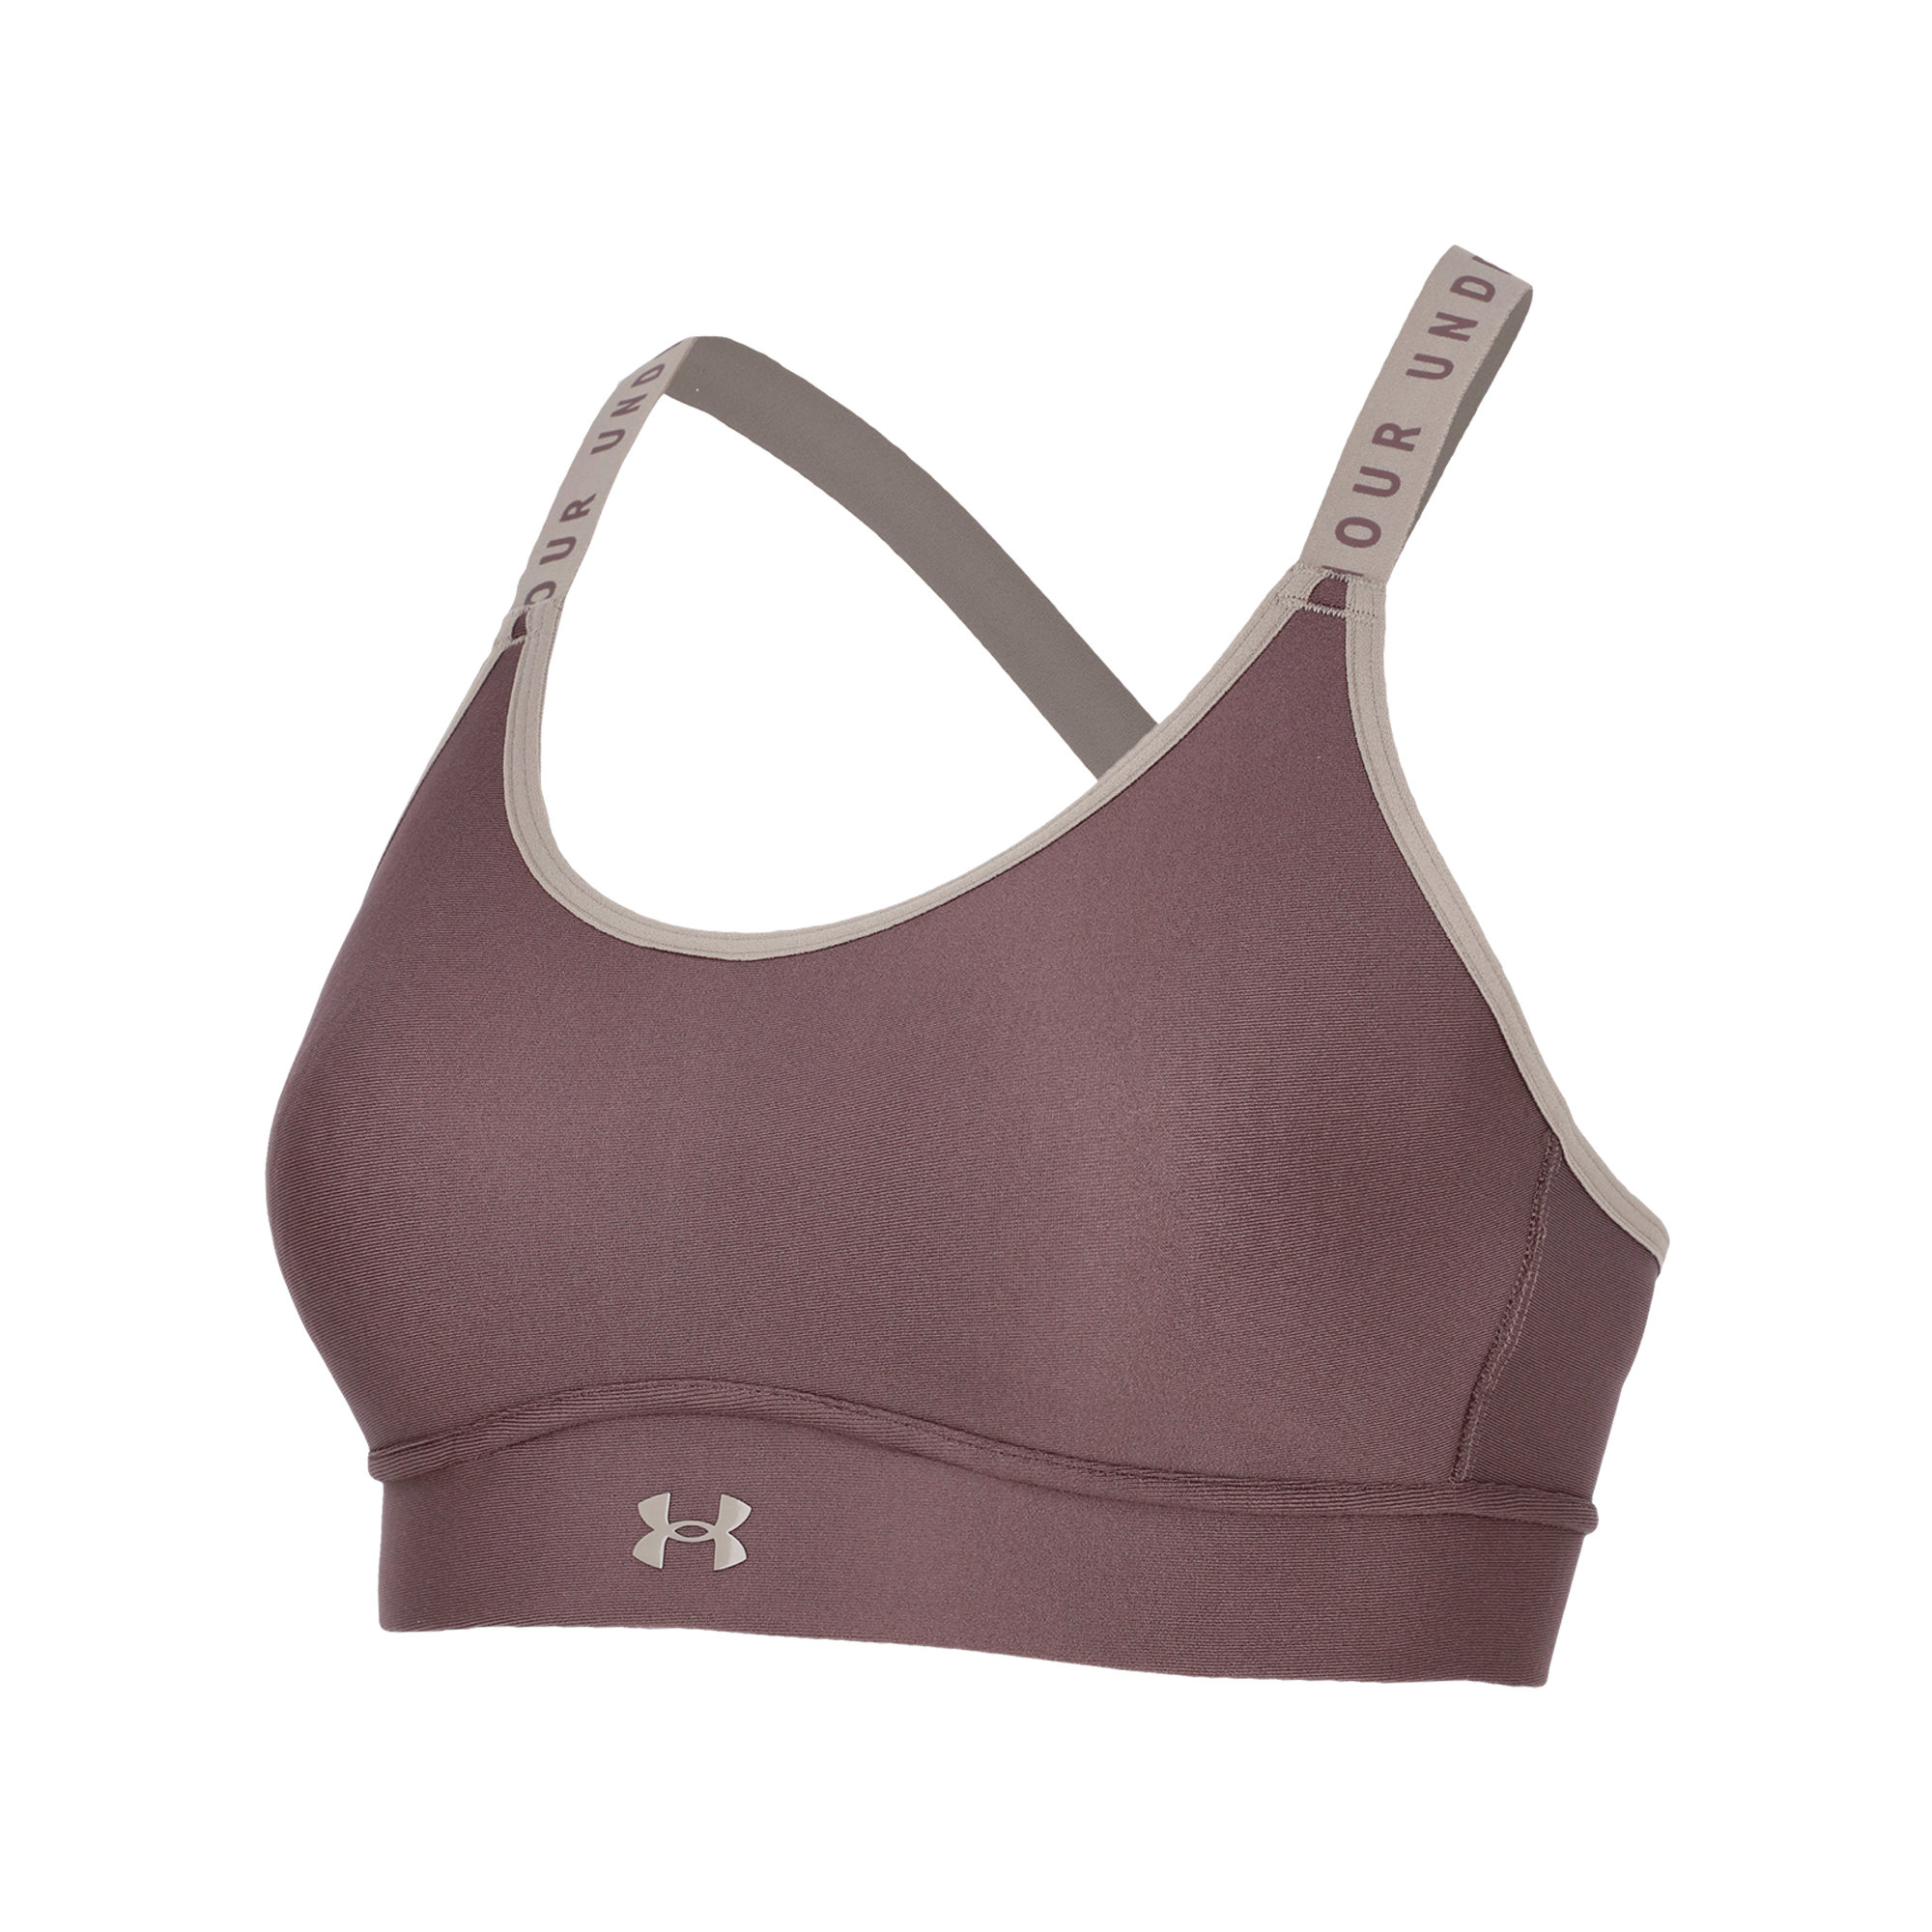 Top Entrenamiento Under Armour Infinity High Heather Mujer